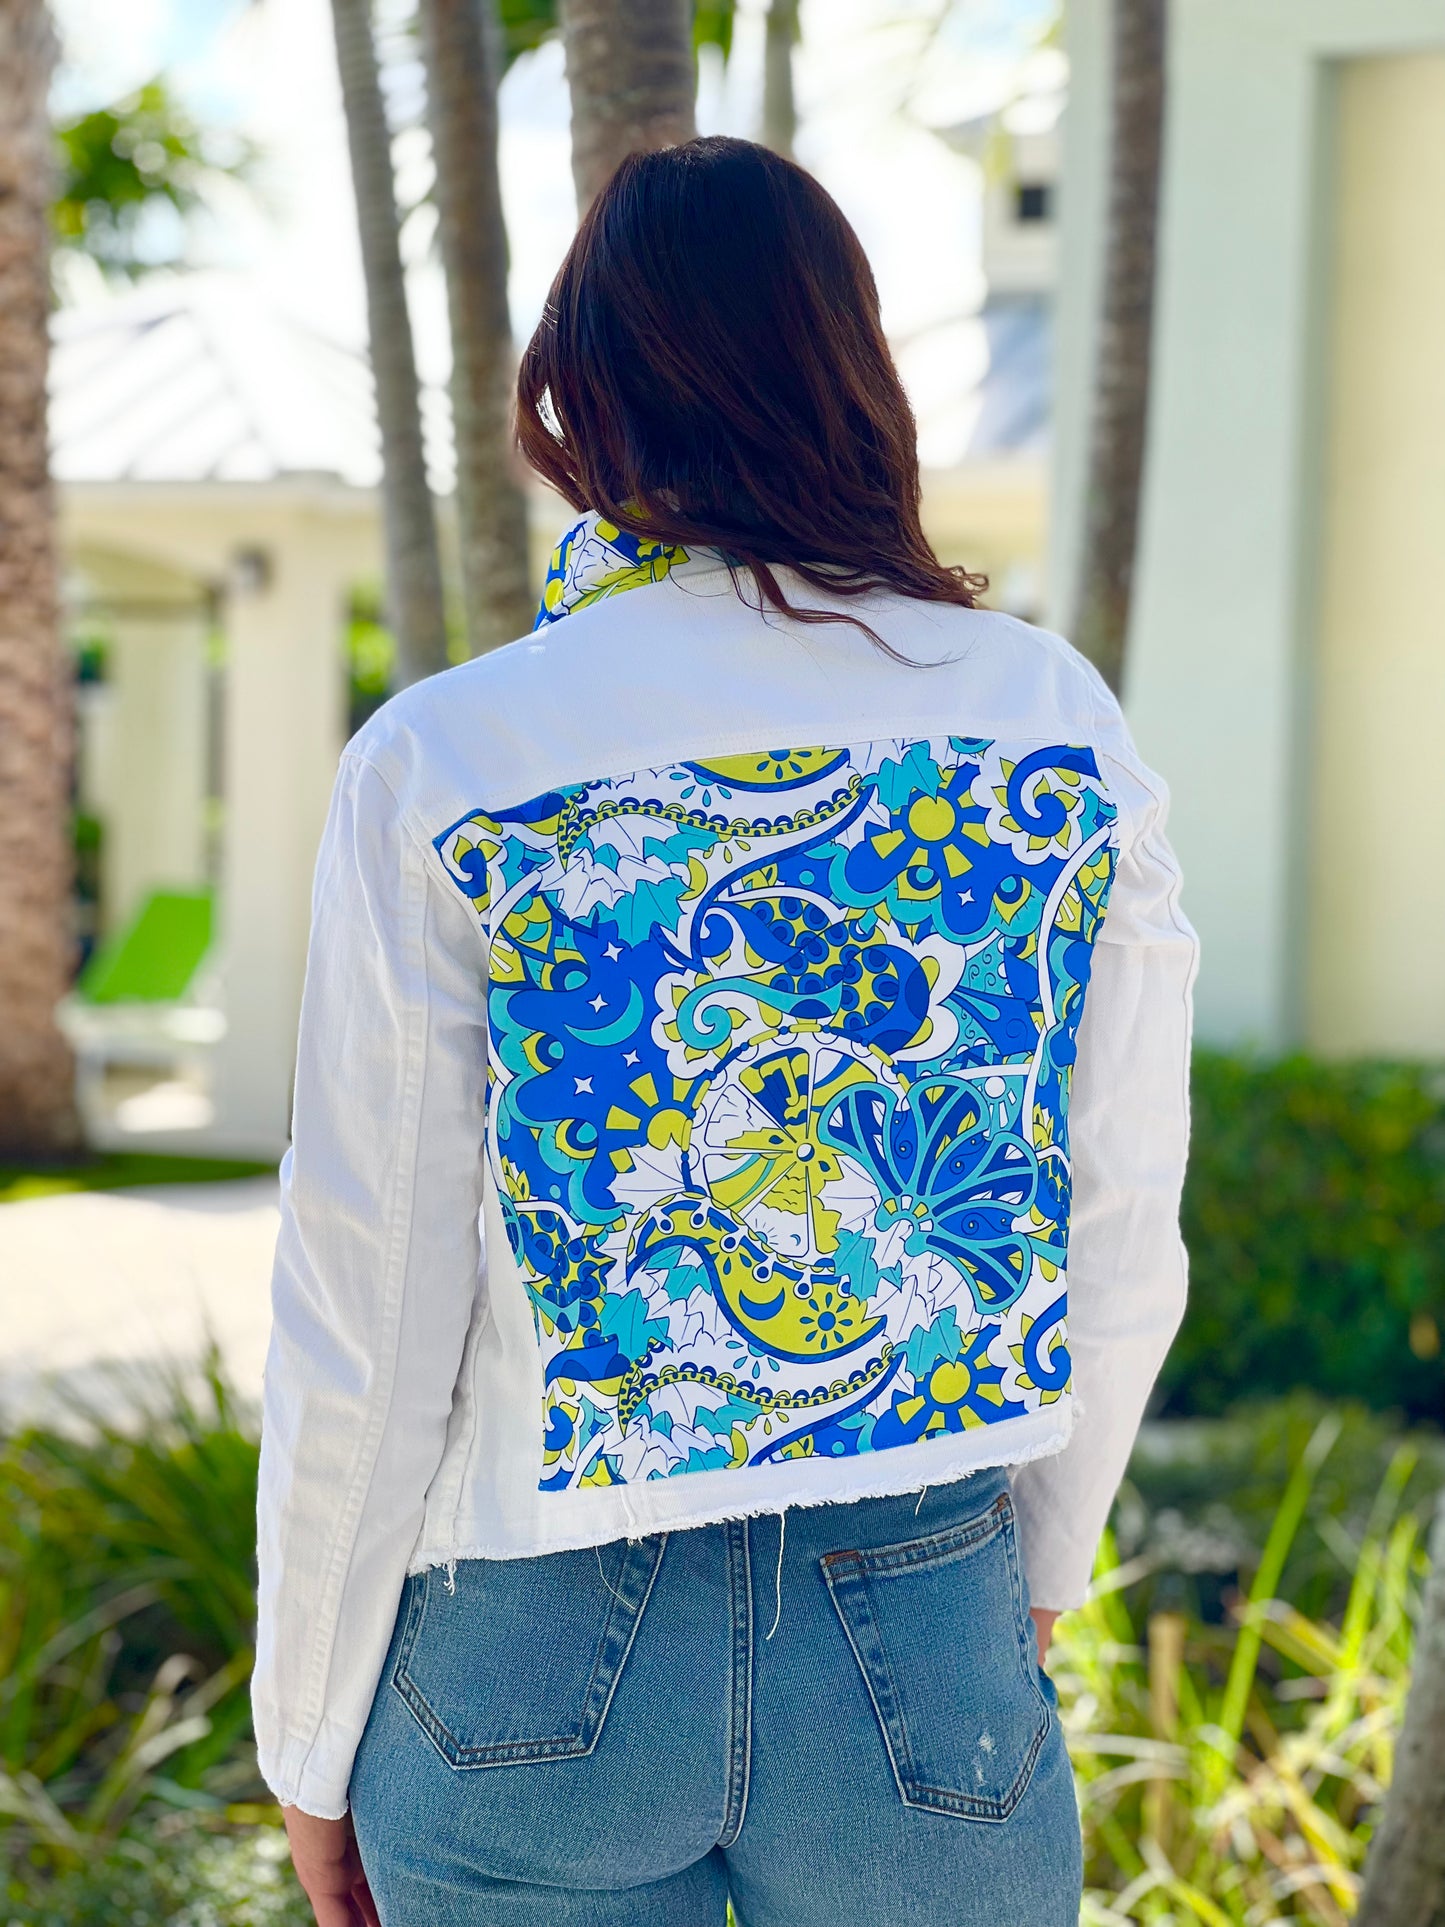 The White Denim Jacket / Pucci Blue and Green